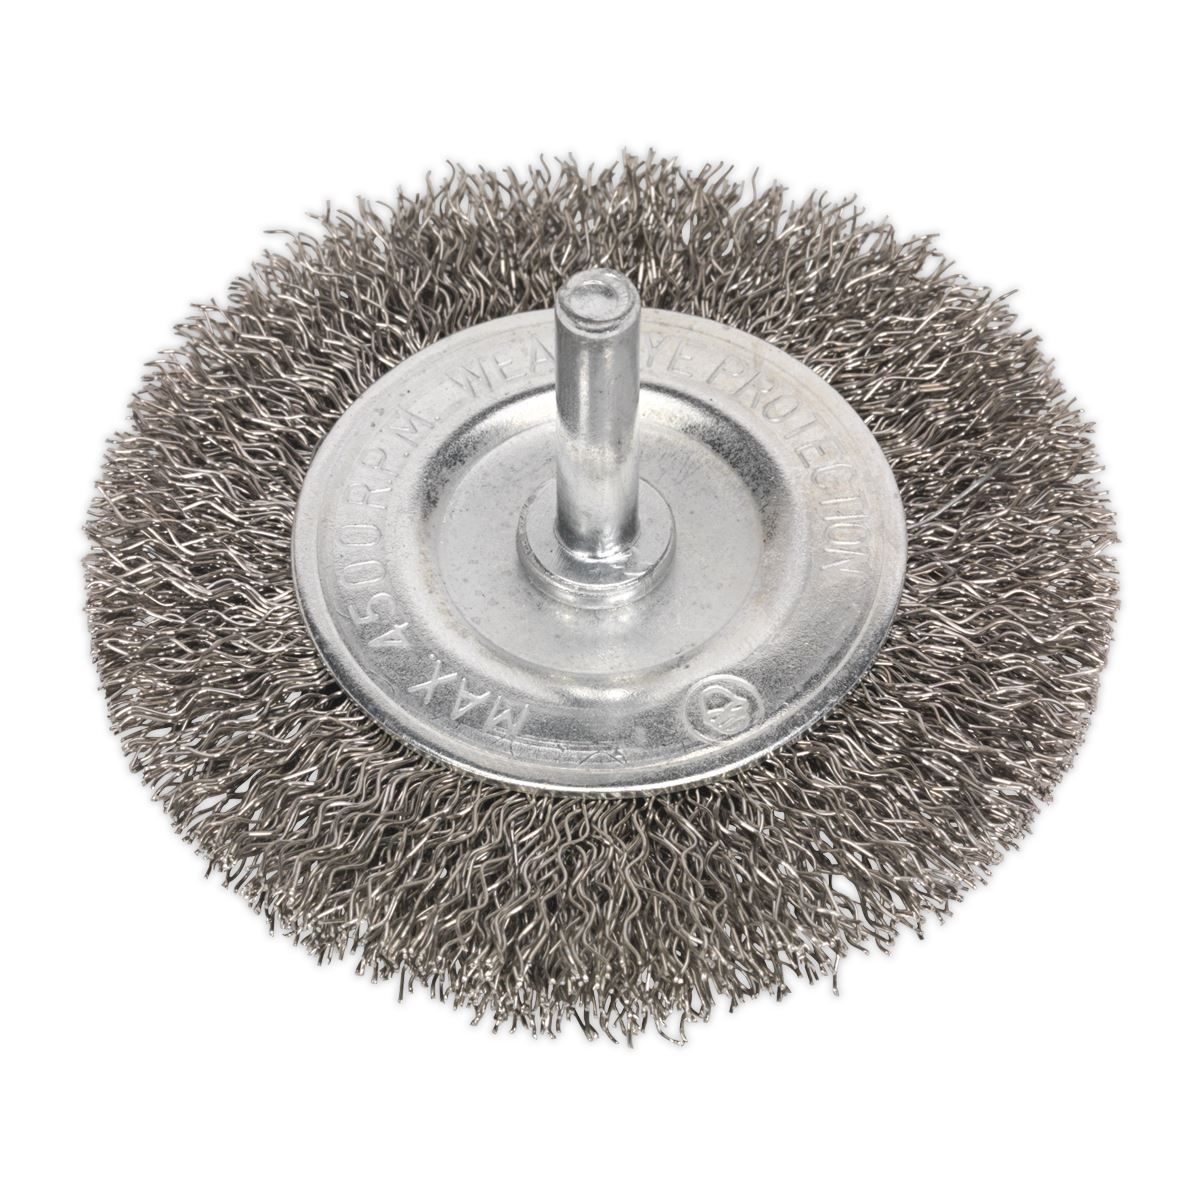 Sealey Flat Wire Brush Stainless Steel 75mm with 6mm Shaft